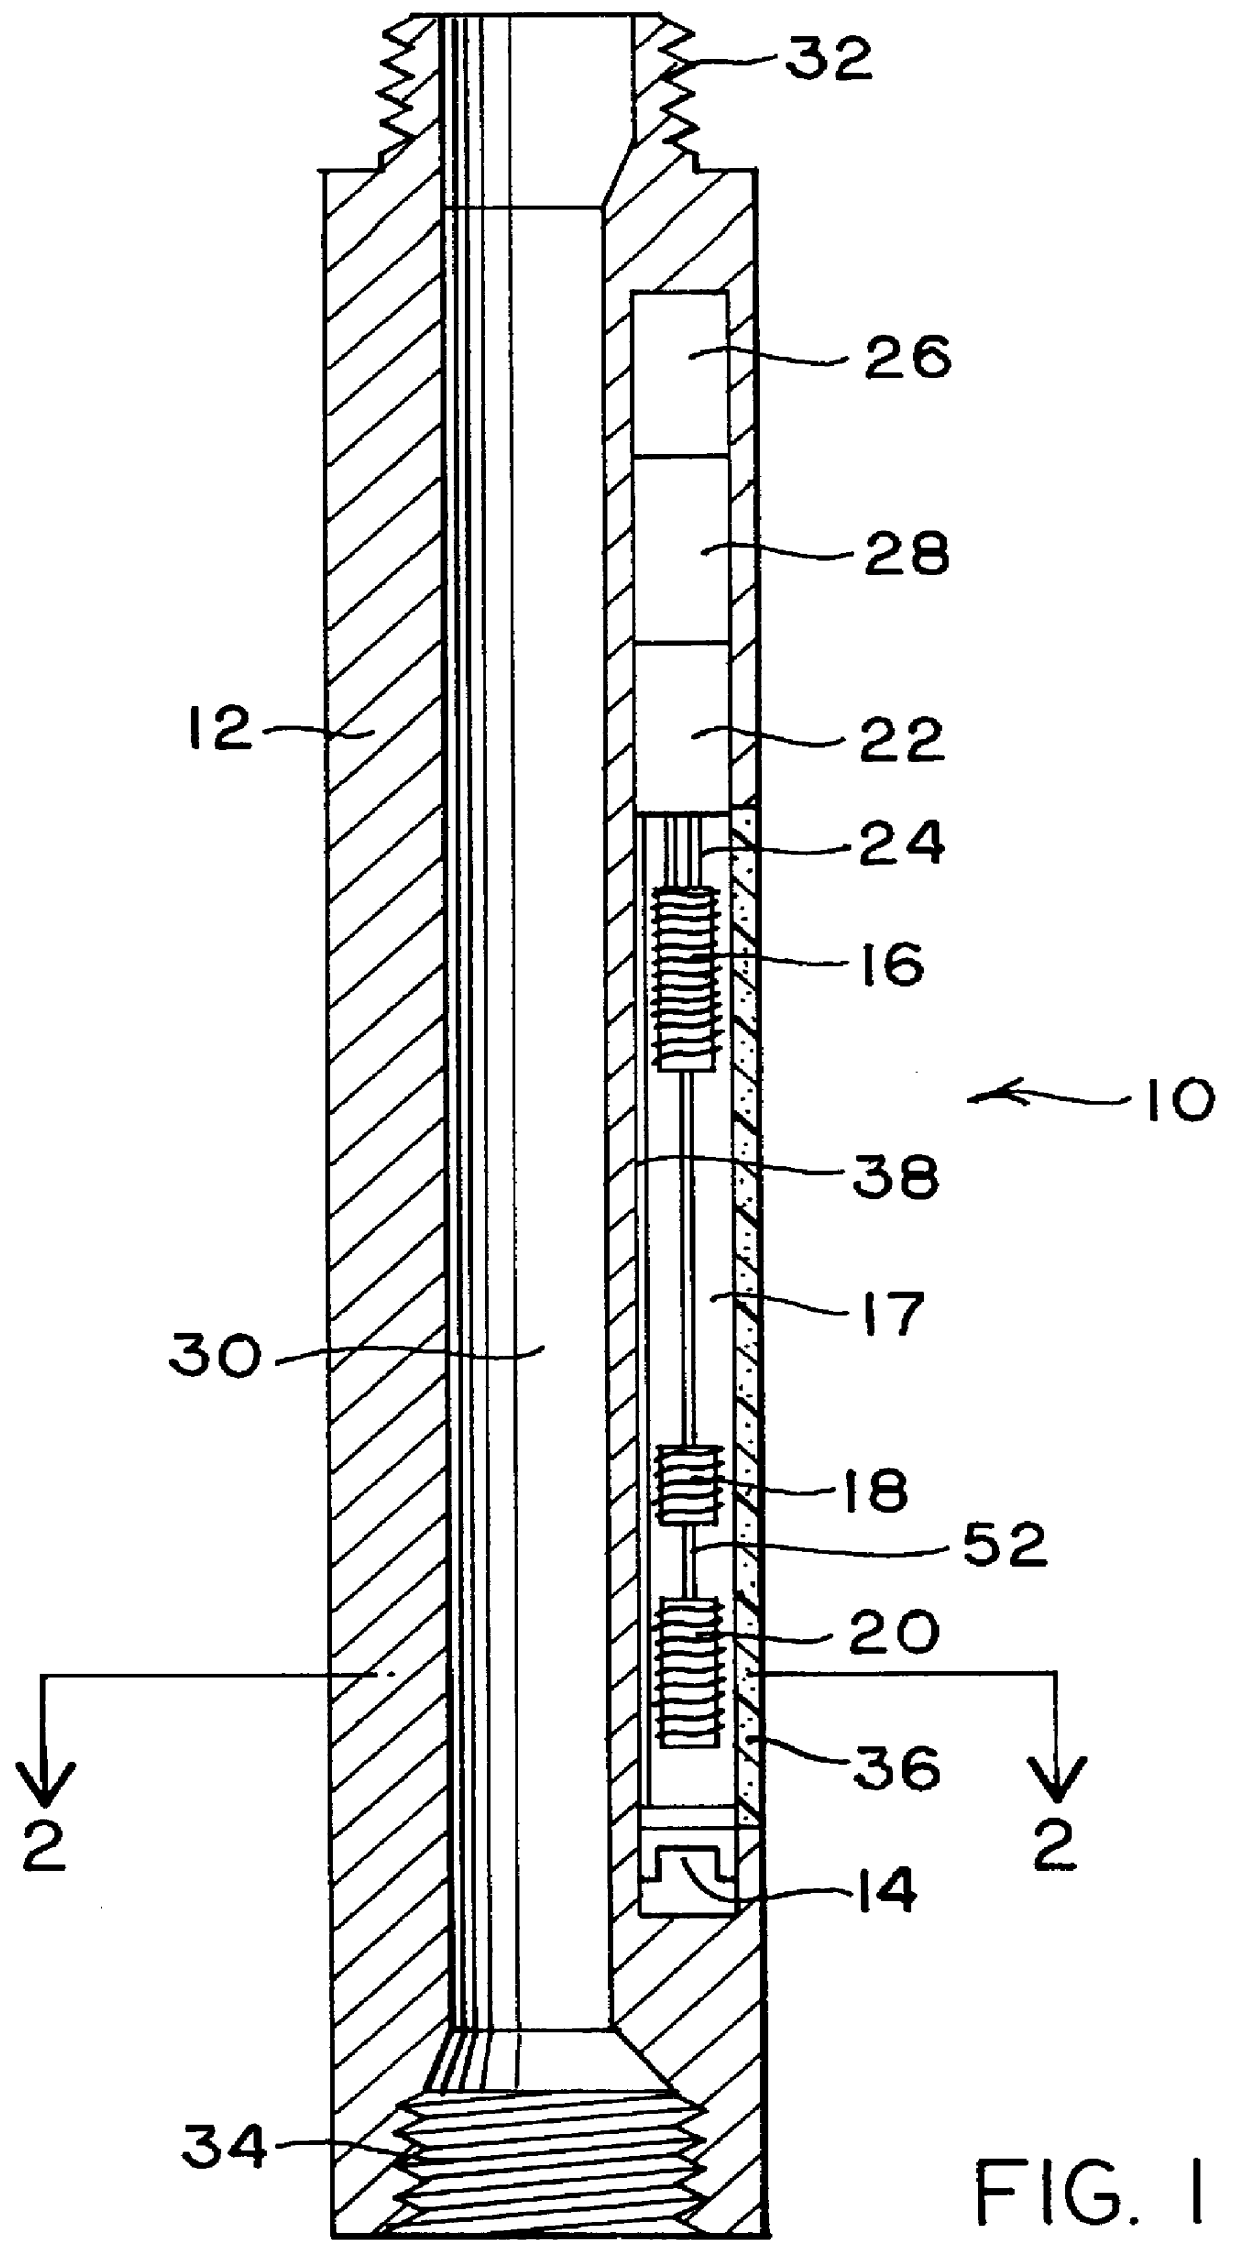 Method and apparatus for directional measurement of subsurface electrical properties